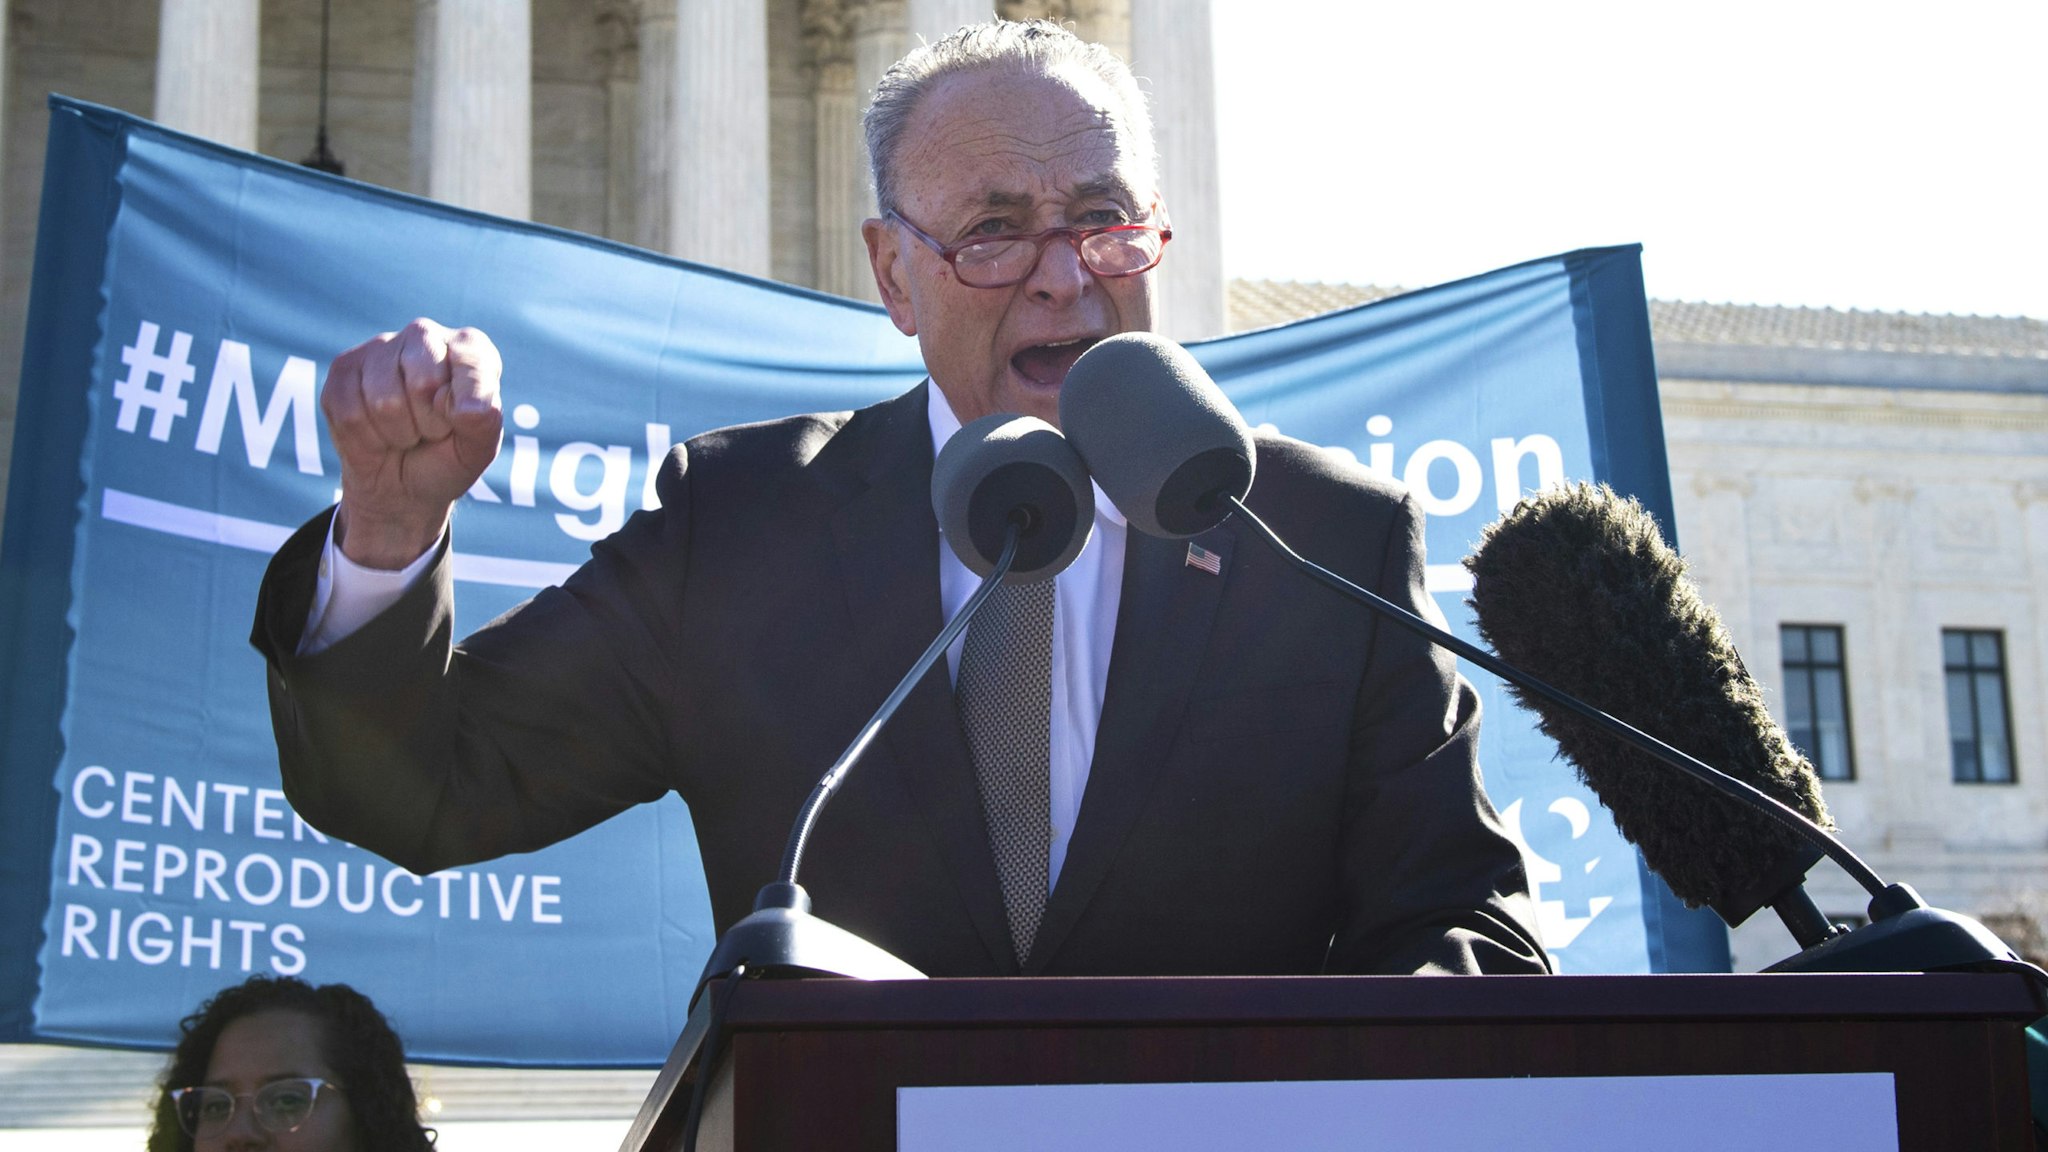 UNITED STATES - MARCH 4: Senate Minority Leader Chuck Schumer, D-N.Y., speaks at an abortion rights rally during a demonstration outside the Supreme Court in Washington on March 4, 2020, as the Court hears oral arguments regarding a Louisiana law about abortion access on Wednesday, March 4, 2020.